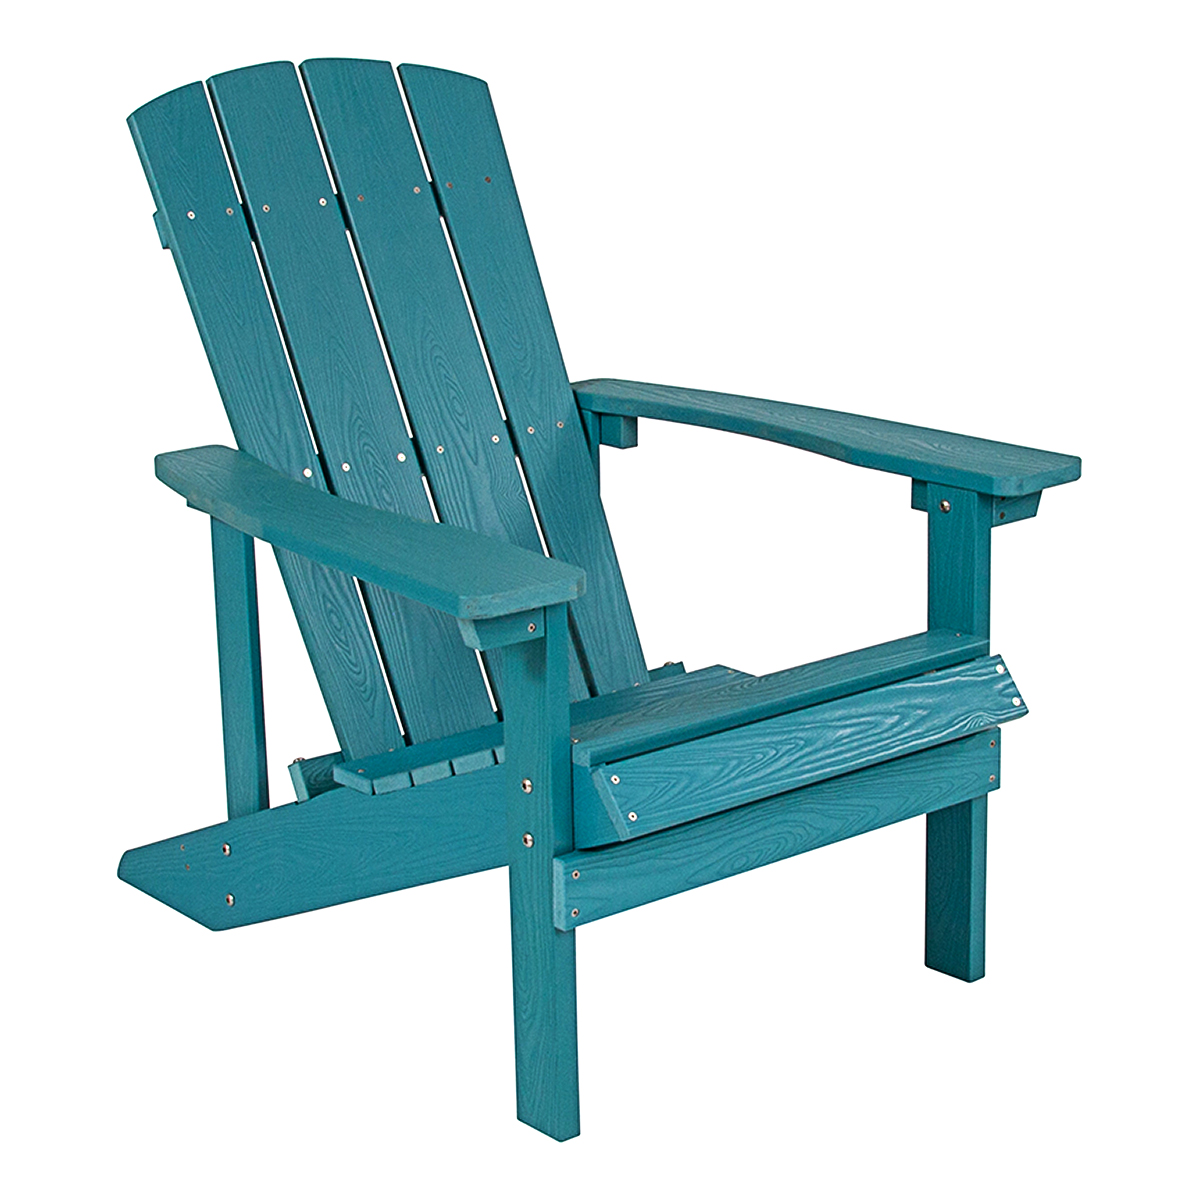 Composite Wood Adirondack Chair, Poly Outdoor Furniture Kits